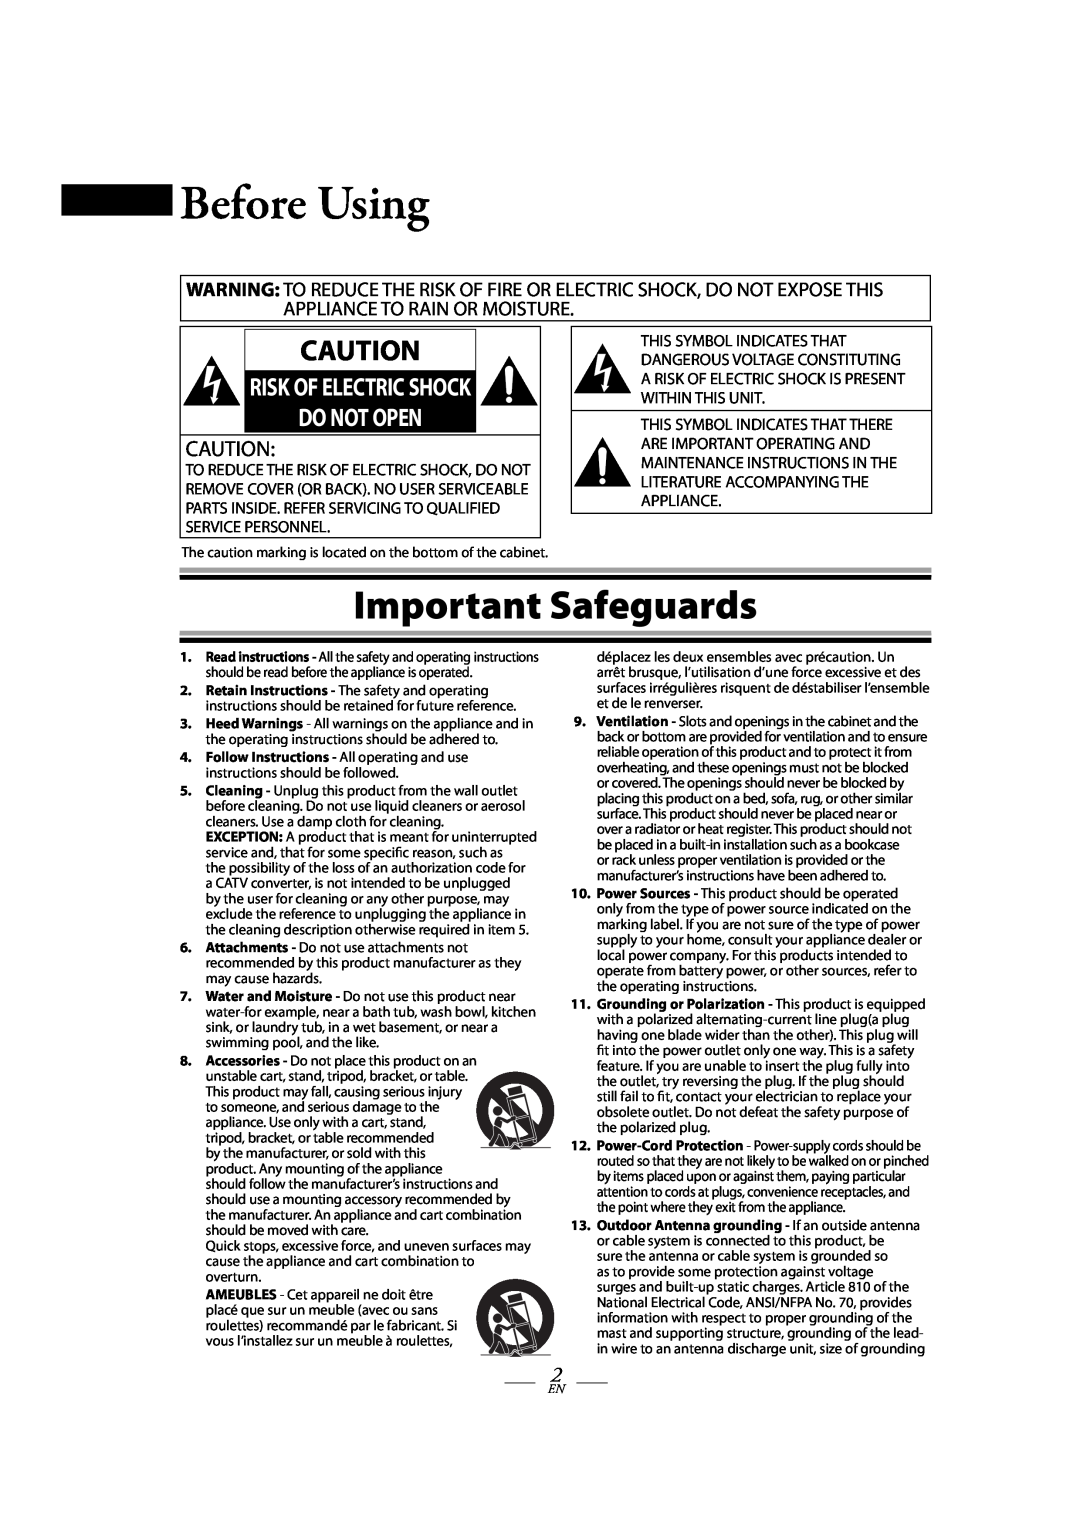 Magnavox TB100MG9 owner manual Before Using, Important Safeguards, Risk Of Electric Shock Do Not Open 